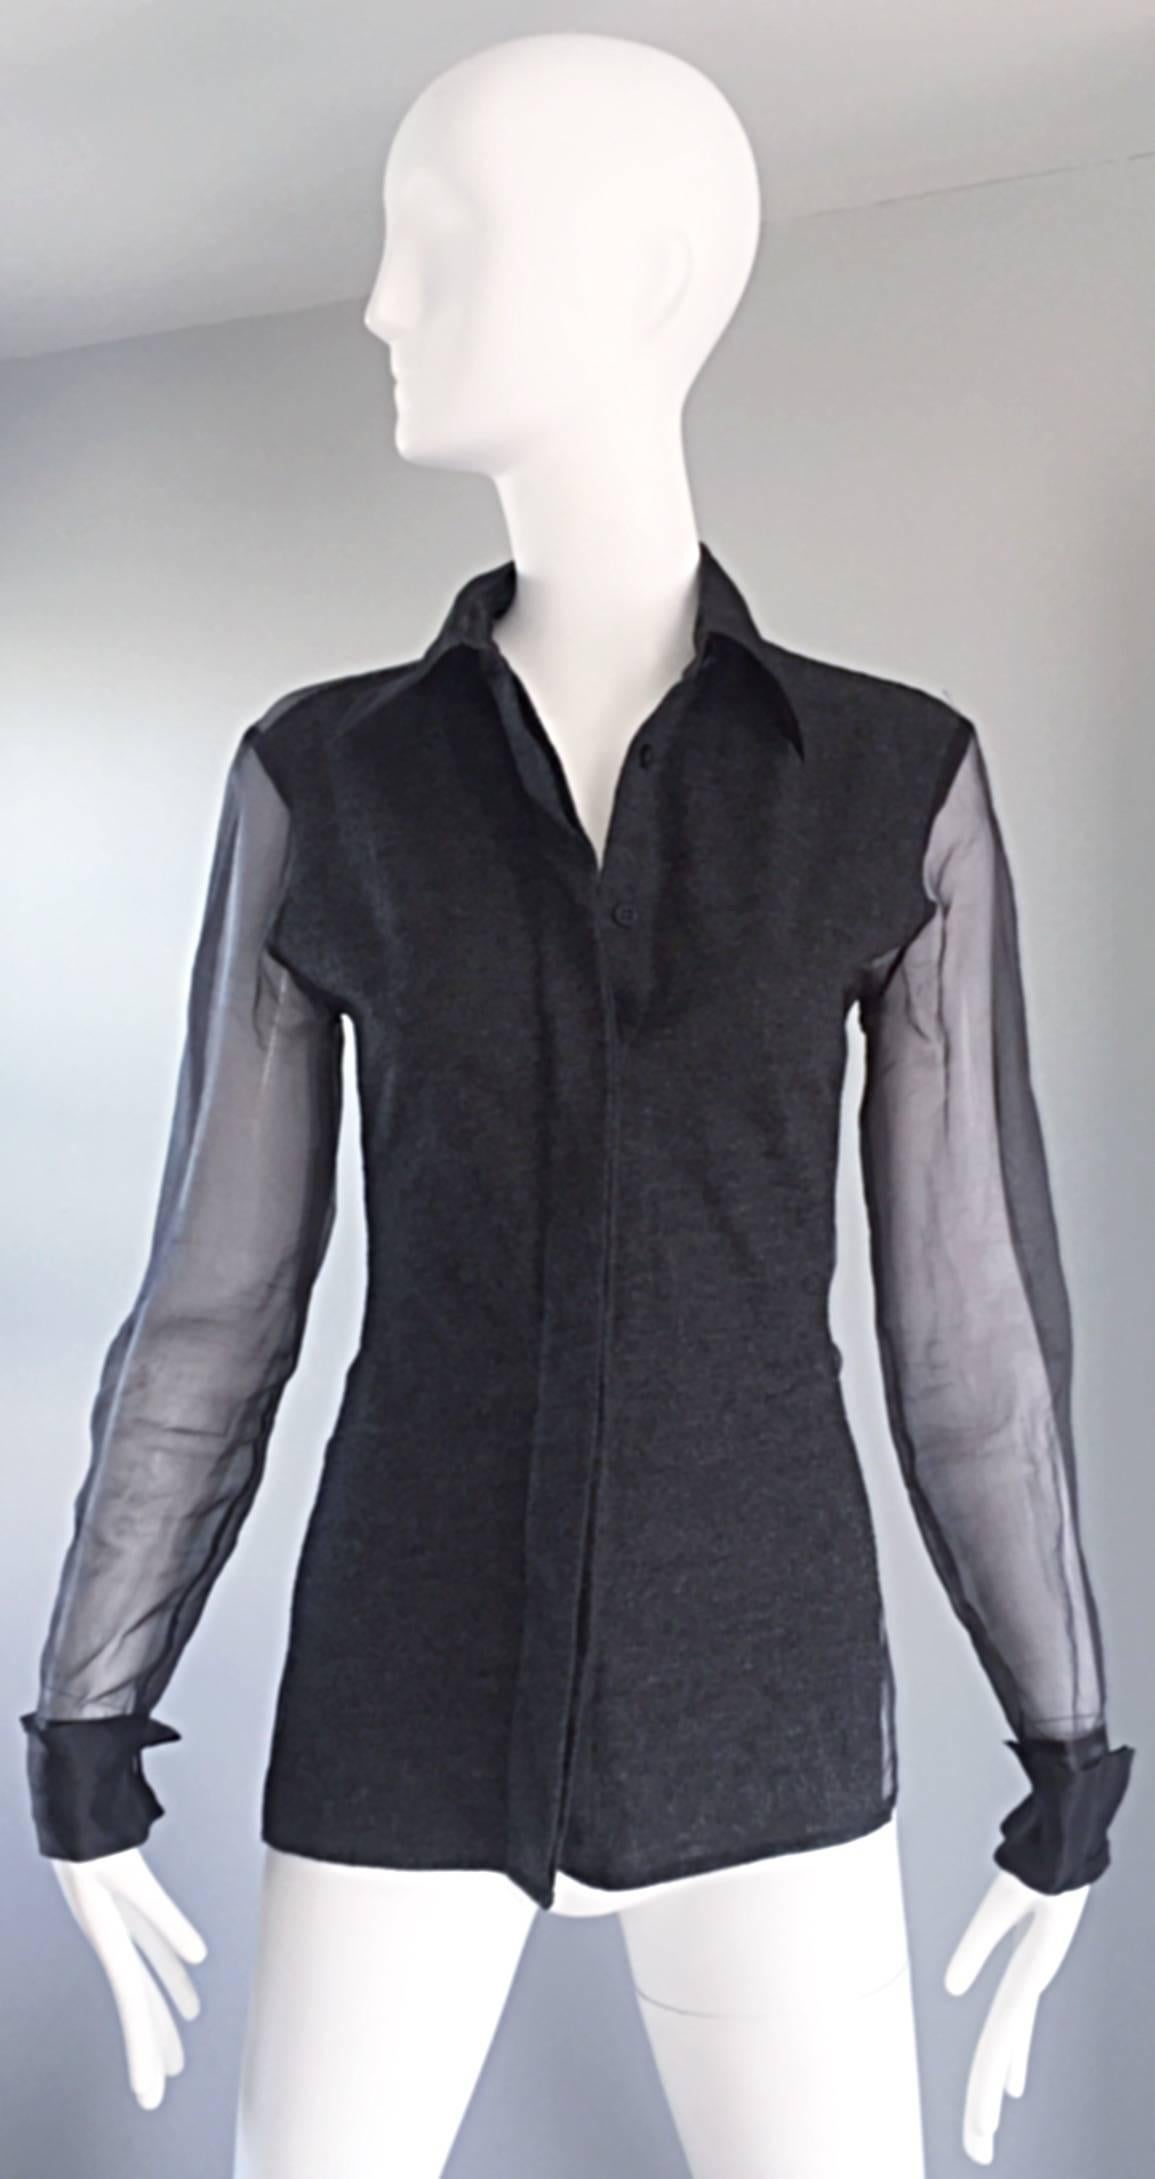 Sexy, yet sophisticated vintage GIANFRANCO FERRE charcoal gray Virgin wool and silk chiffon semi sheer blouse! Features a grey wool front with grey silk chiffon sleeves and sheer chiffon back, and collar. A chic take on the classic button up.